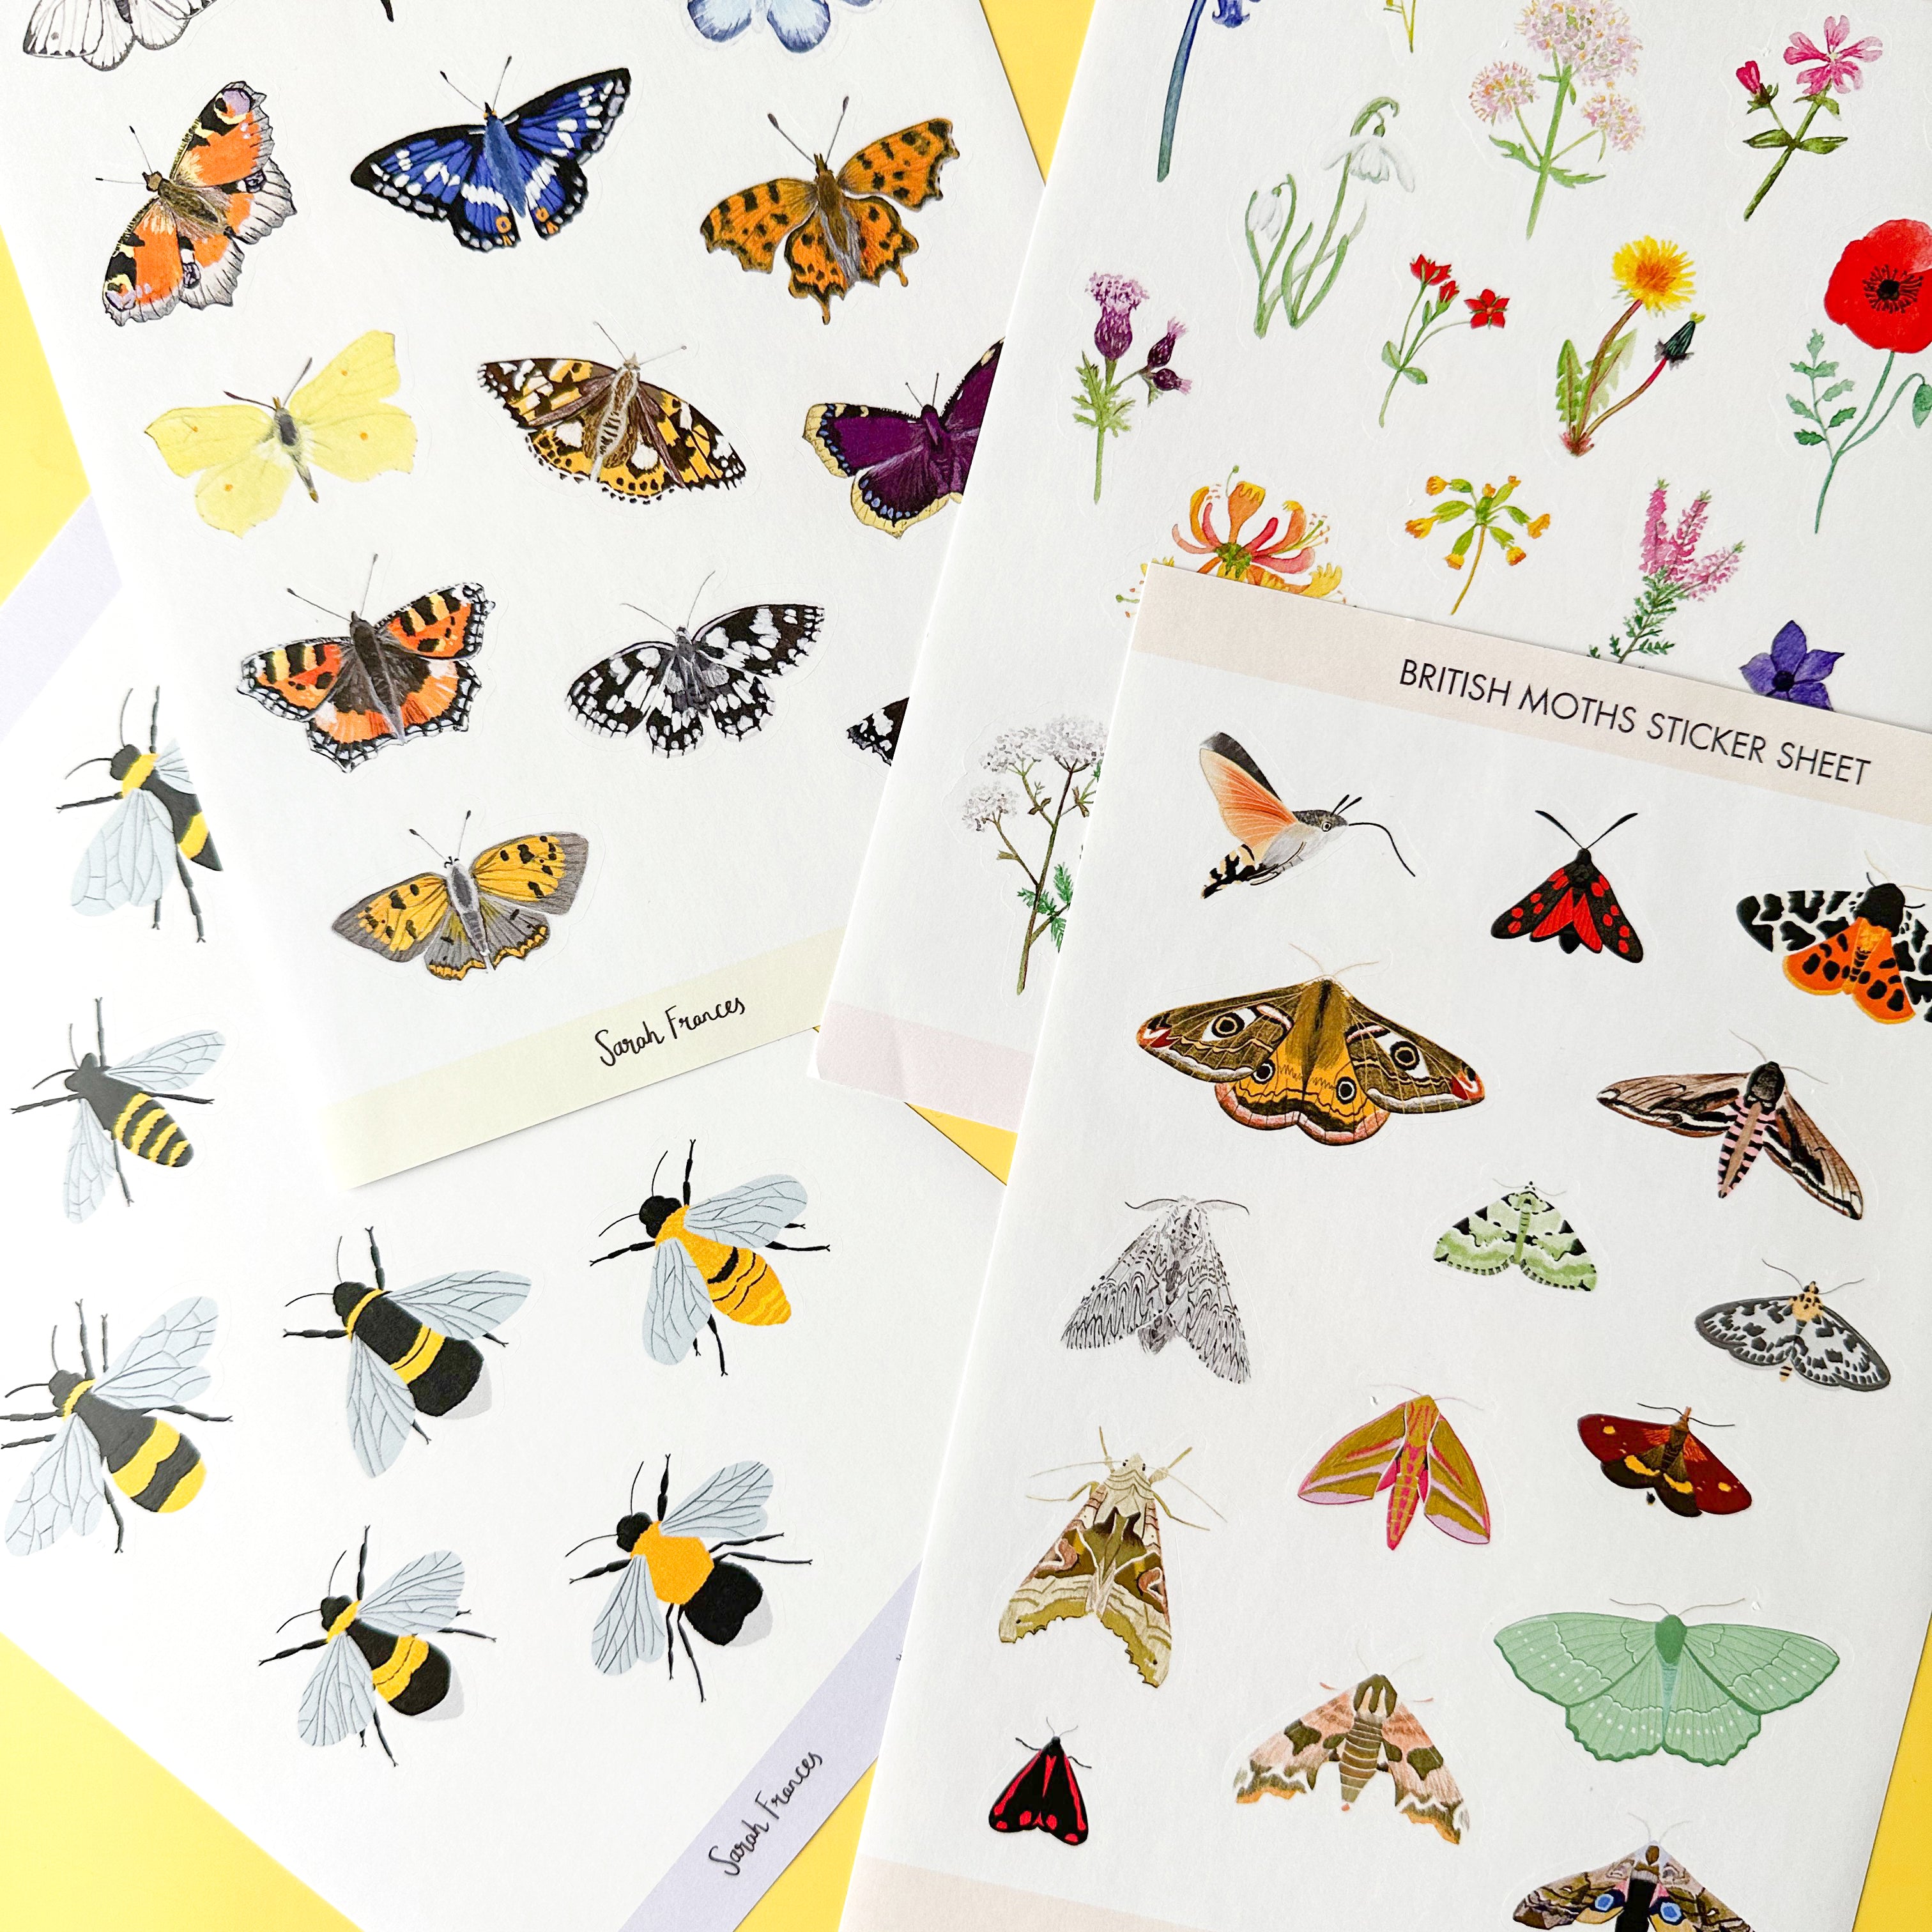 Decorate with the charm of British wildlife using our British Bumble Bees Sticker Sheet, featuring adorable illustrations of bumblebees. Ideal for adding a touch of nature and sweetness to your crafts. These stickers are designed by Sarah Frances and sold at BBB Supplies Craft Shop.